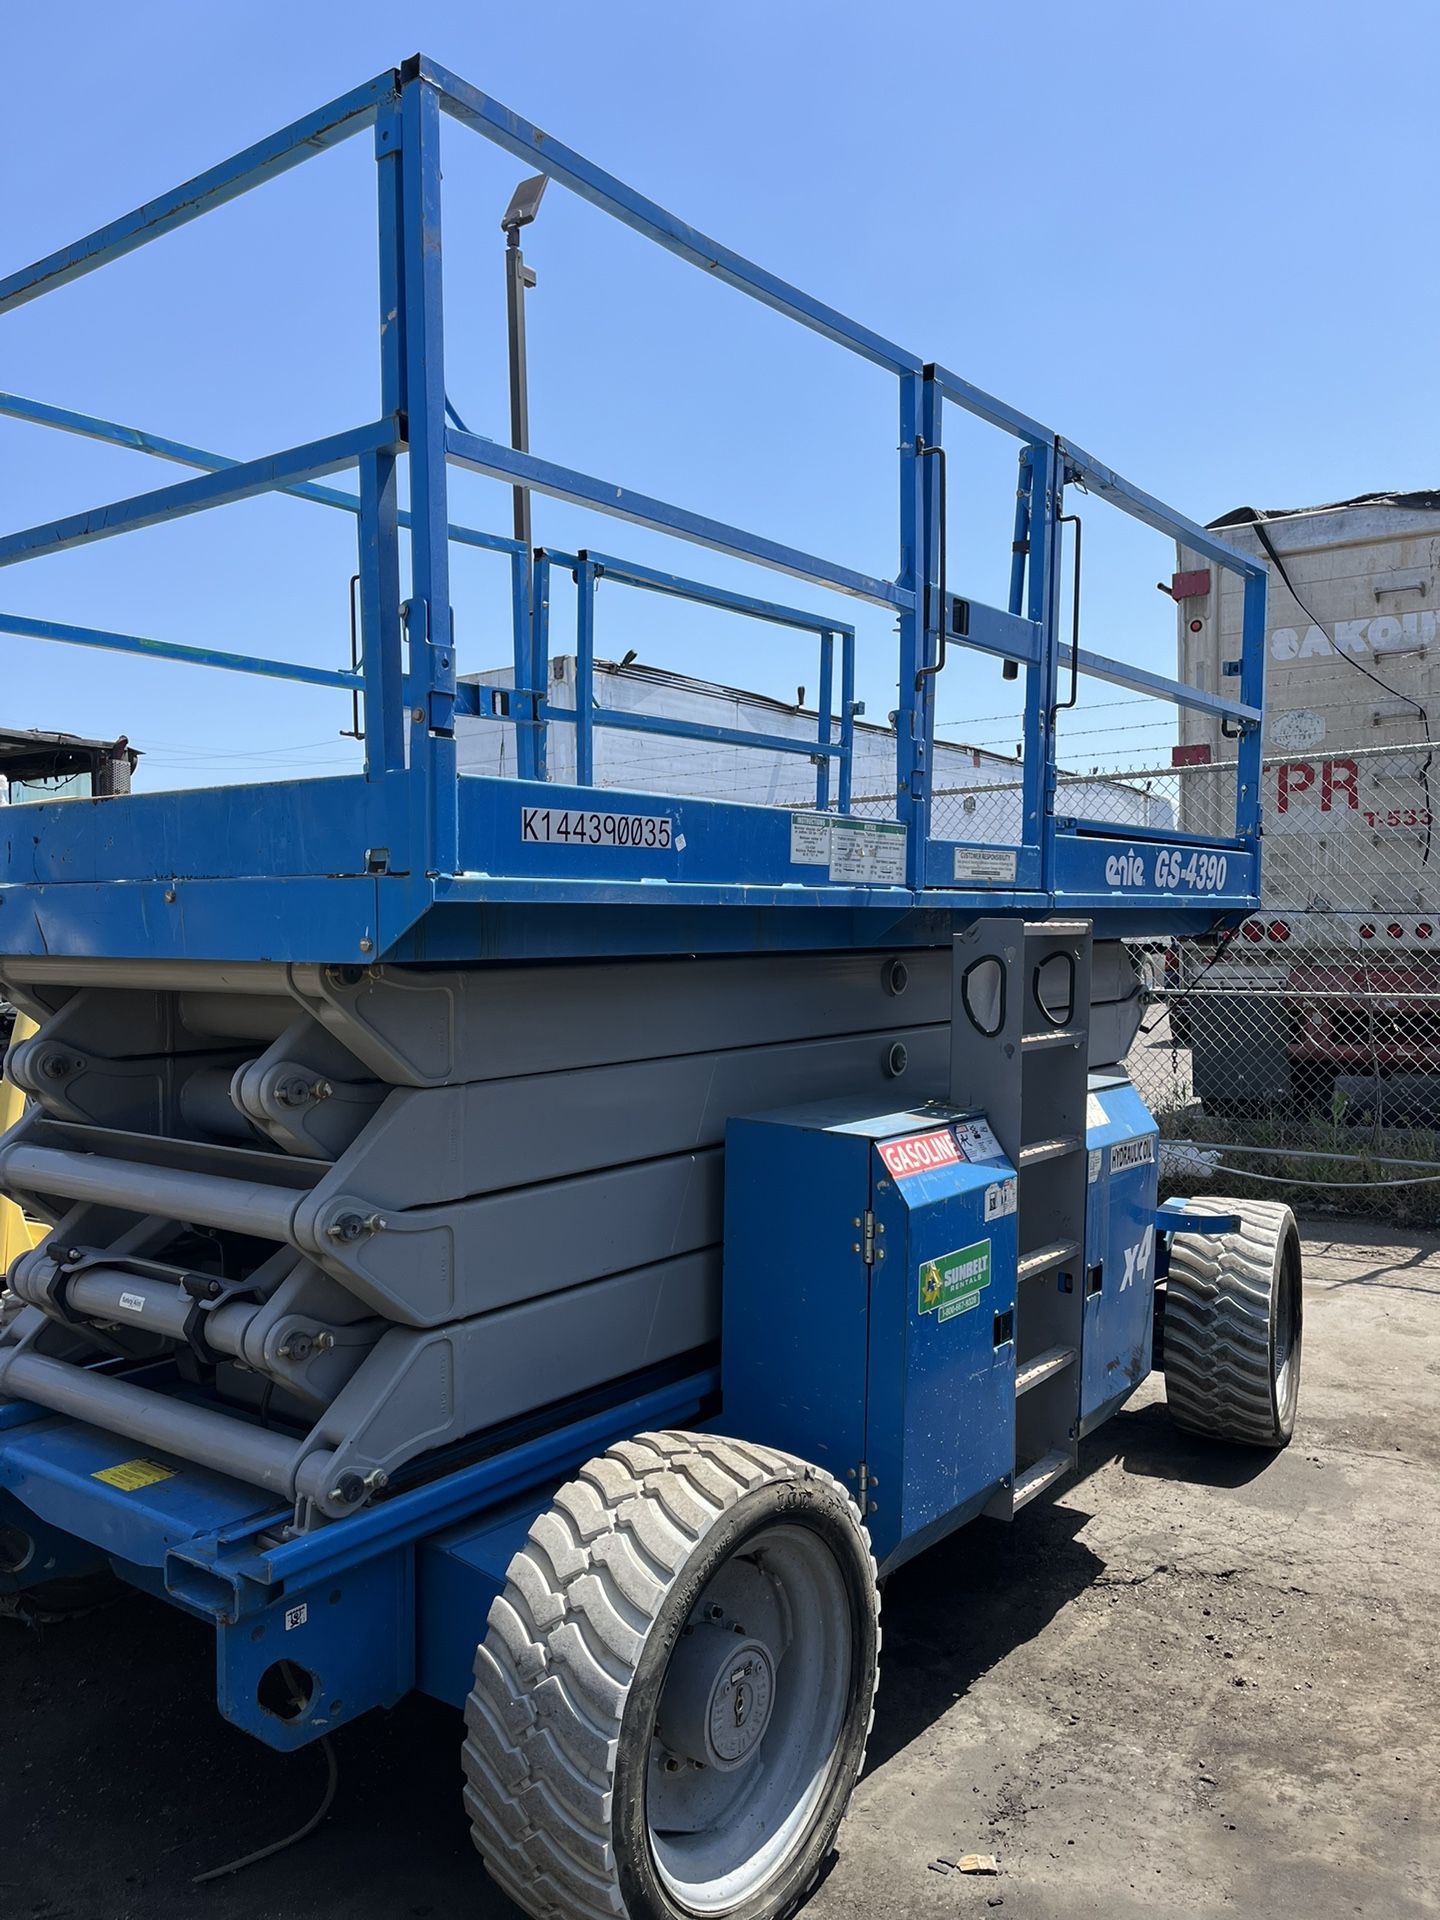 2014Genie GS-4390R Scissor Lift Goes 43 Feet High, does not run, unknown, system blinks sometimes starts unknown, possibly small issue, selling as is 